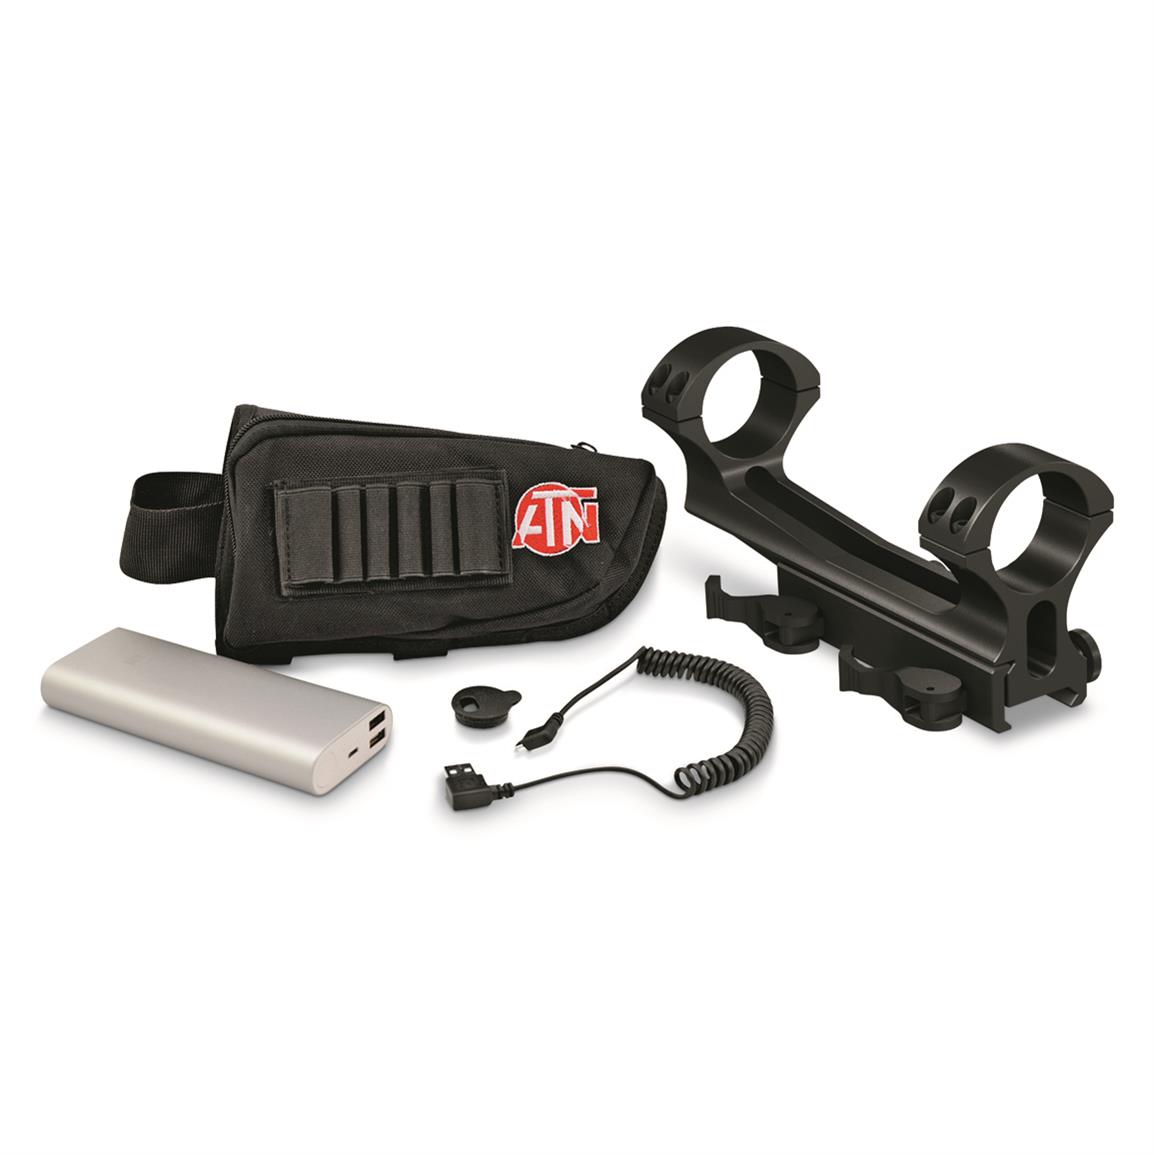 ATN ThOR LT Advanced Accessory Bundle, Extended Battery Life Kit & 30mm Scope Mount